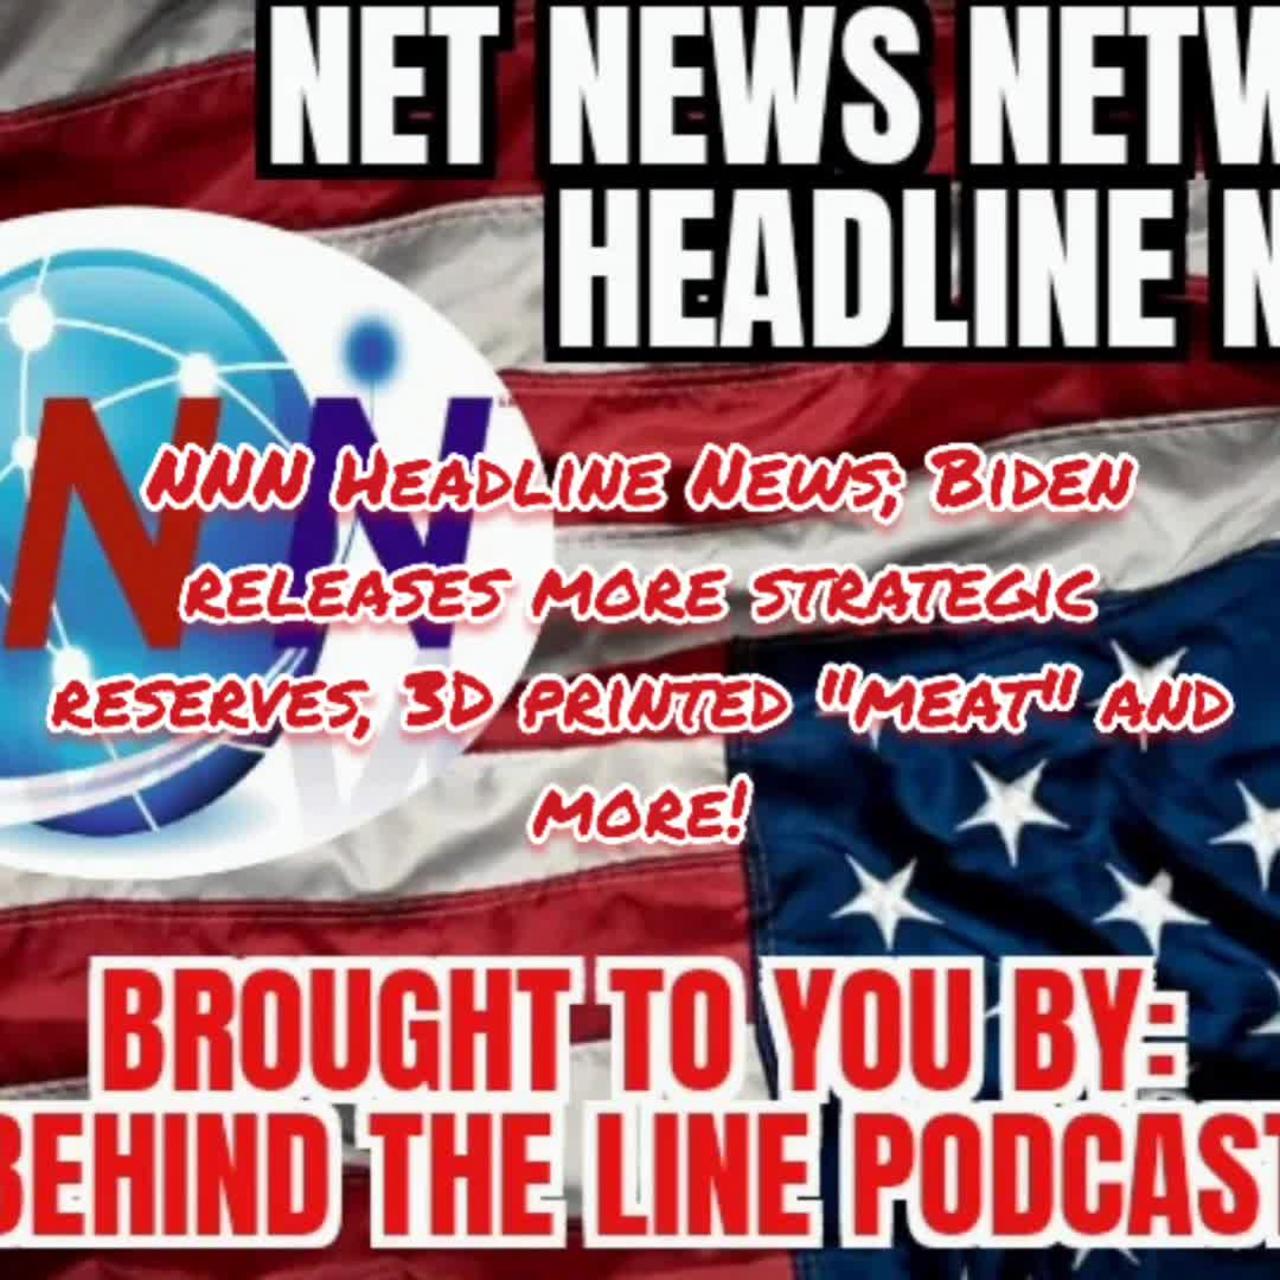 NNN Headline News; Biden releases more strategic reserves, 3D printed "meat" and more!